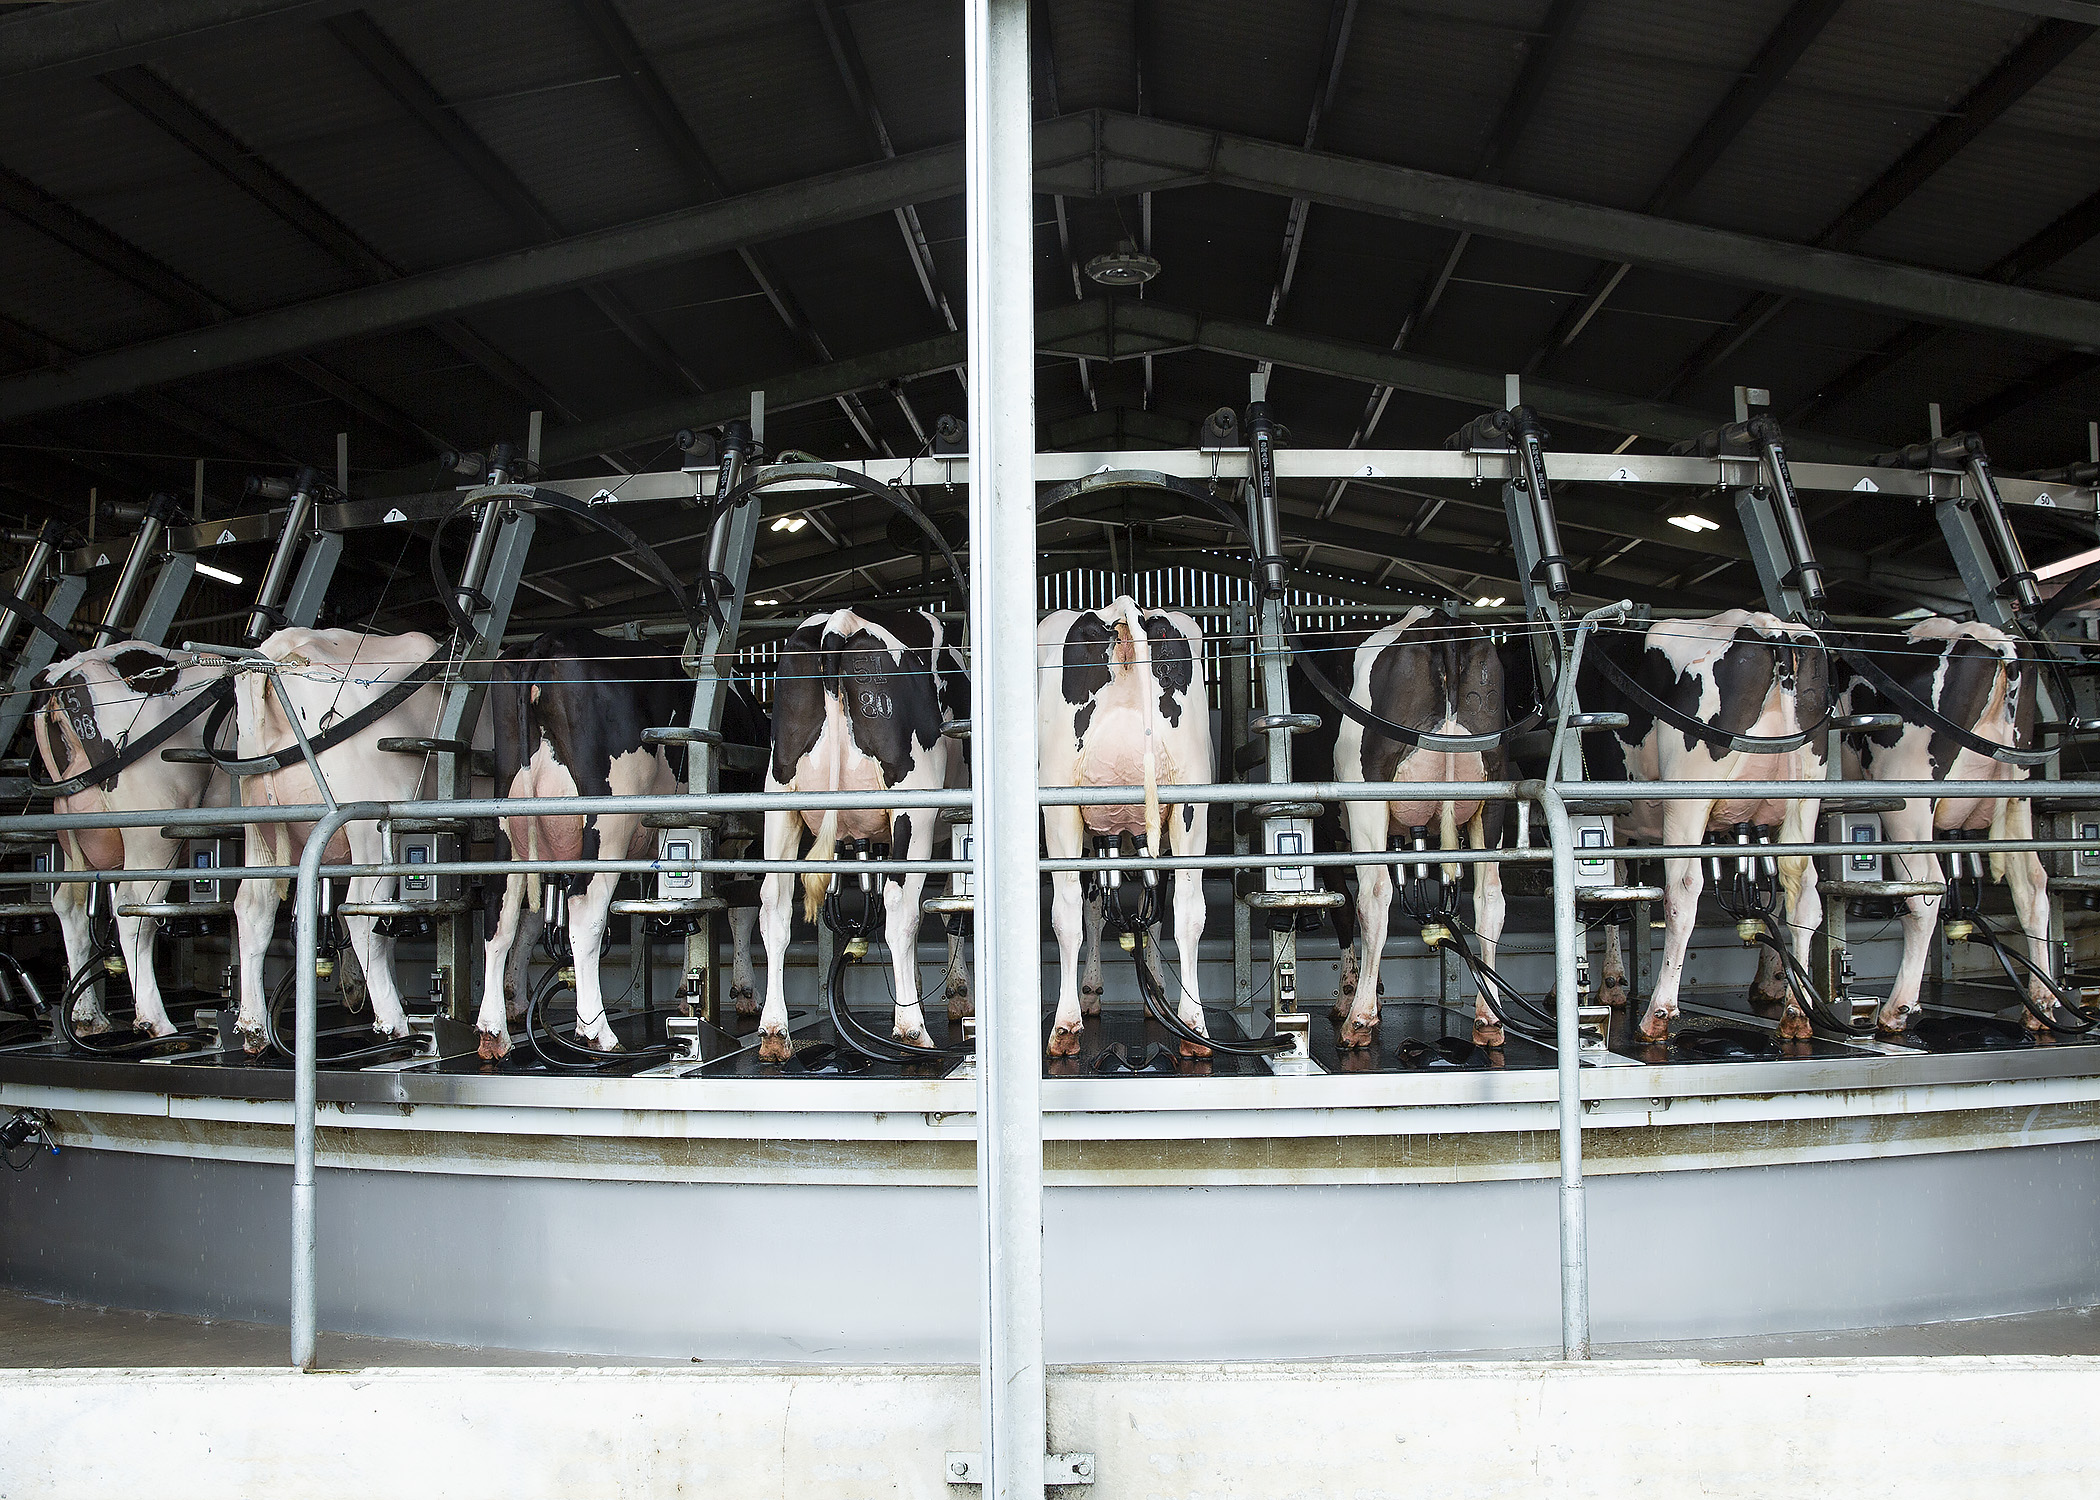 Line of cows being milked by milking machine.